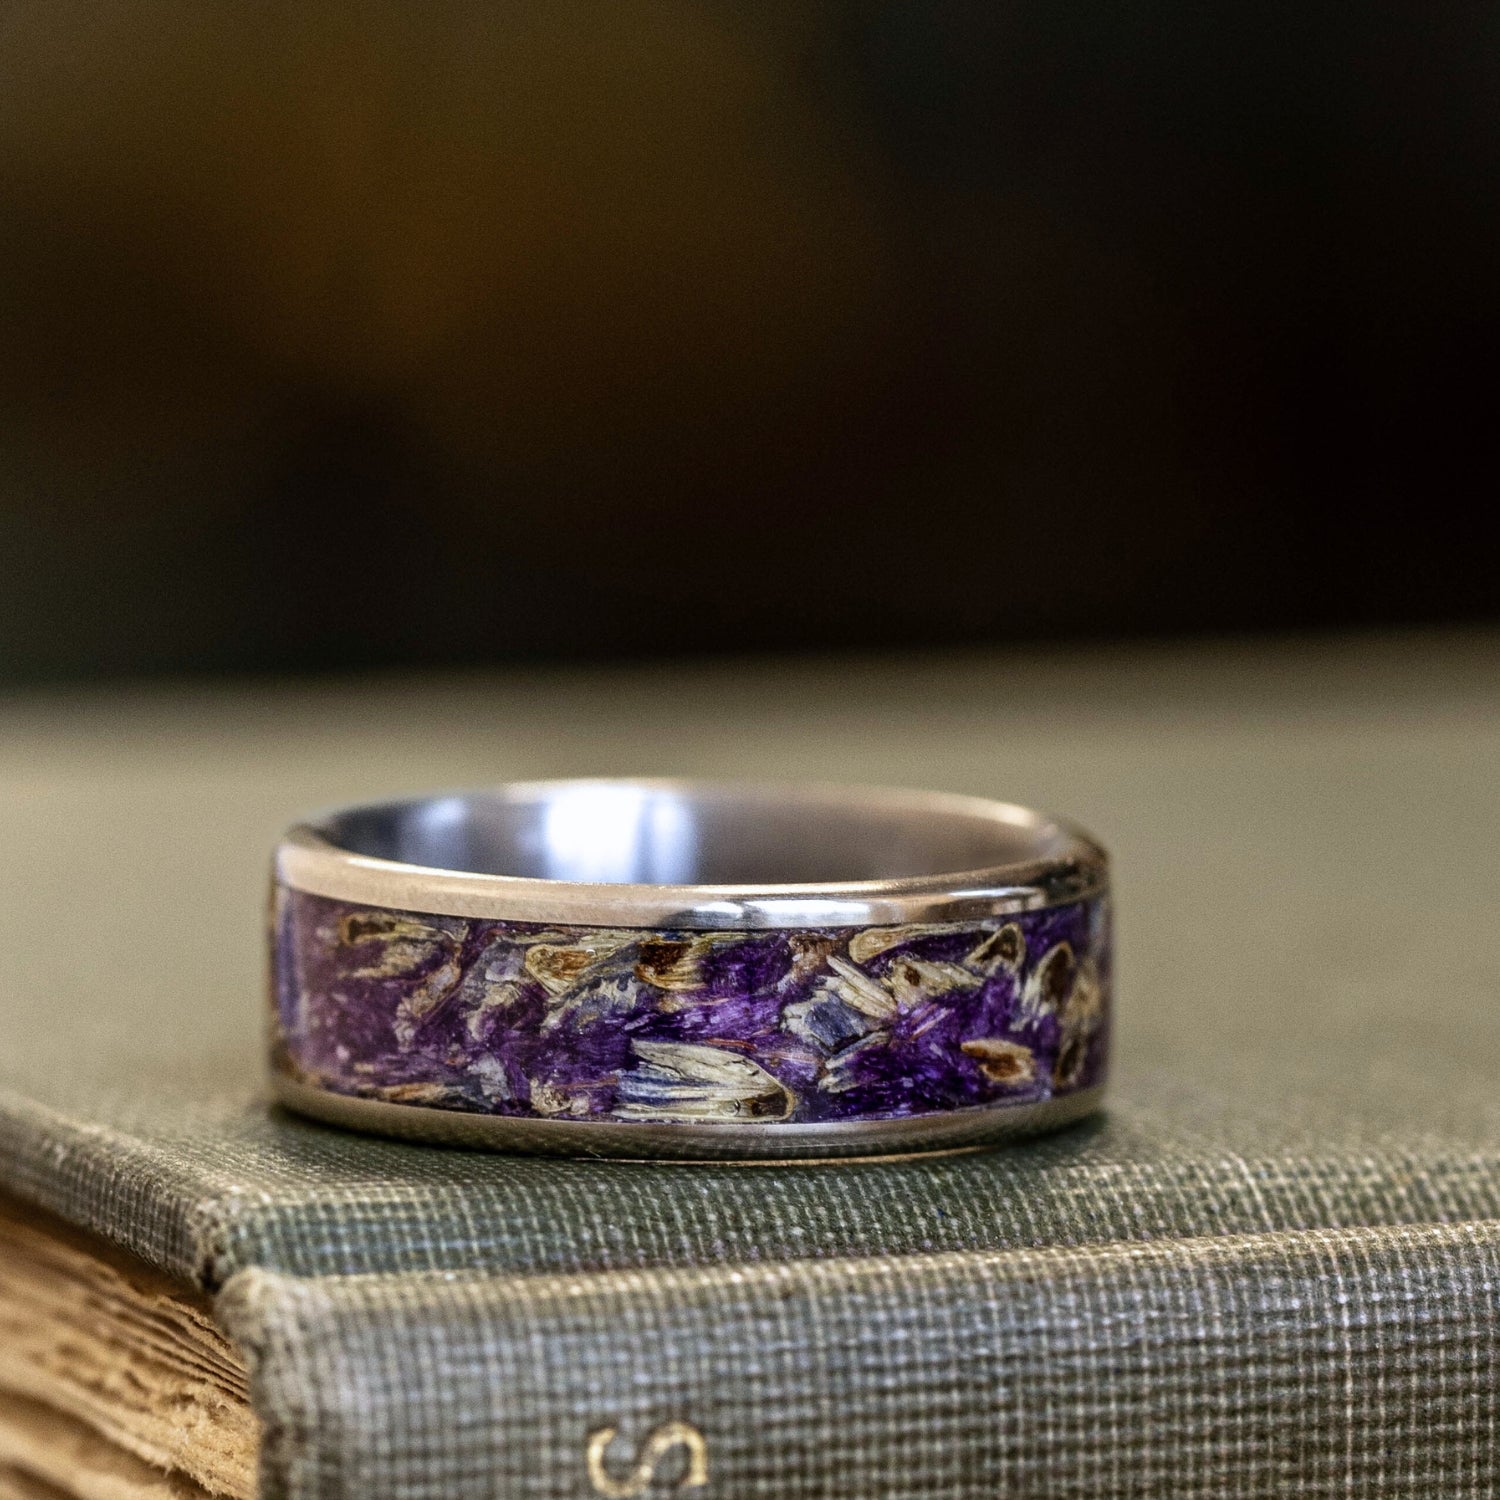 GENTS ZIRCONIUM WEDDING BAND WITH GOLD AND PURPLE BURL WOOD ACCENTS -  Howard's Jewelry Center